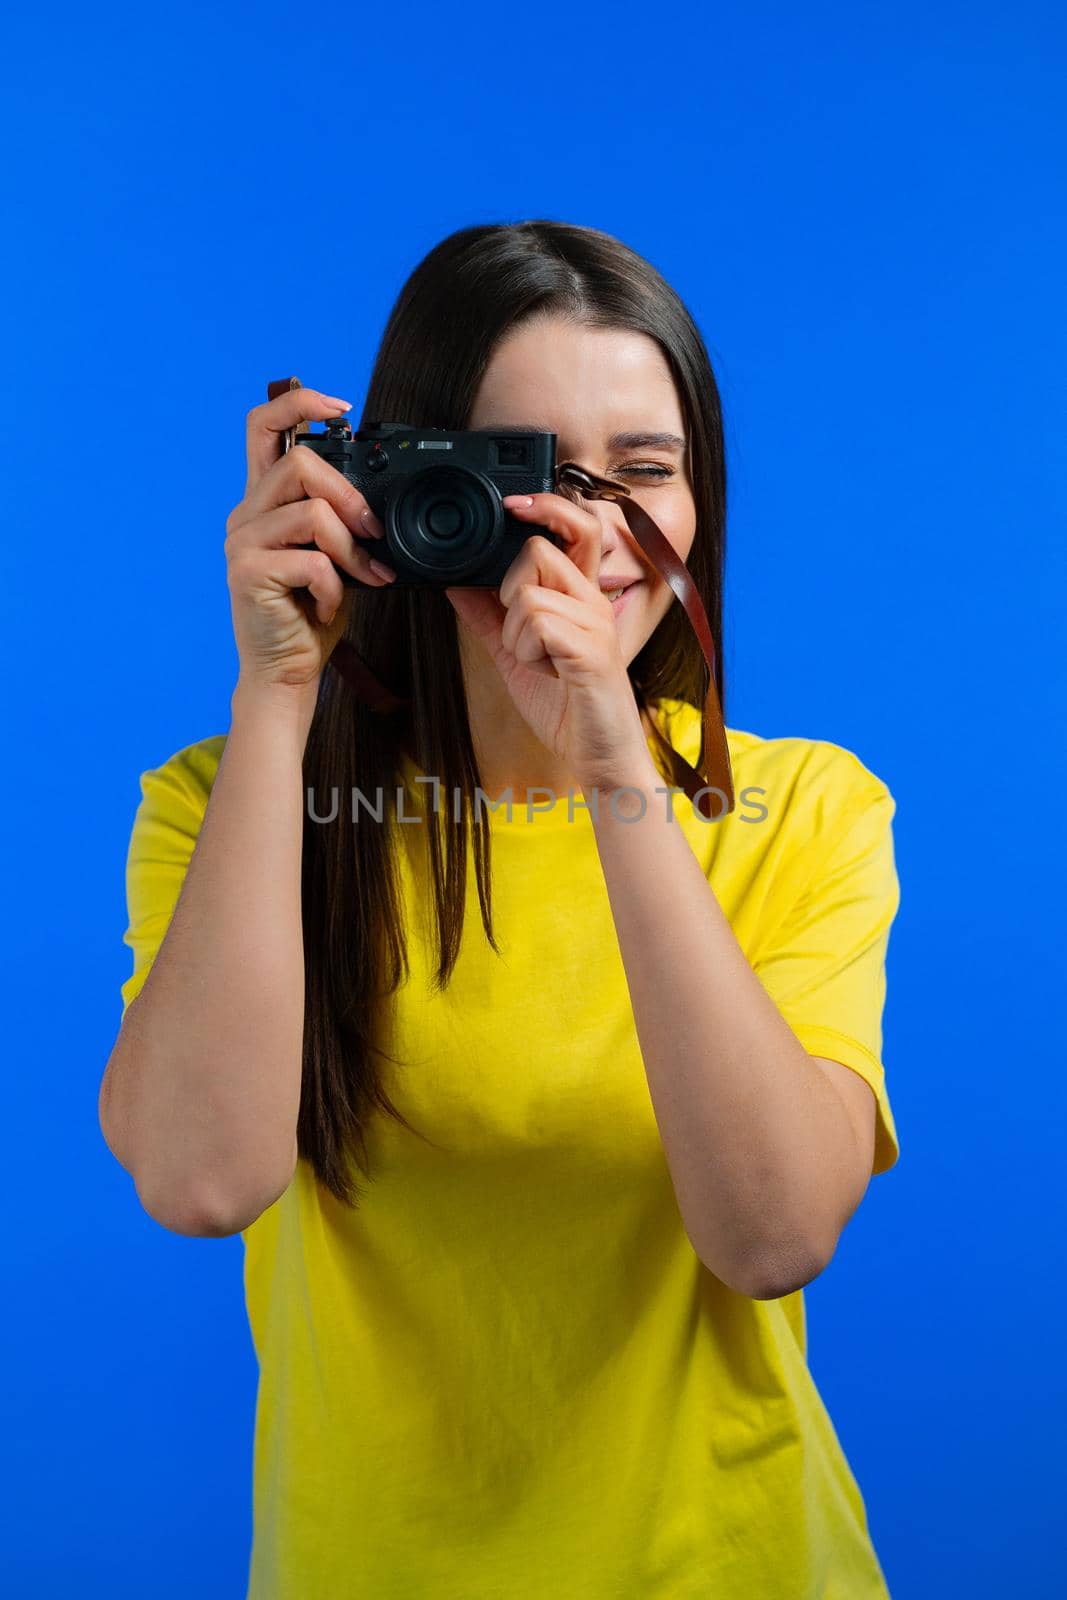 Young pretty brunette woman in yellow shirt takes pictures with DSLR camera over blue background in studio. Girl smiling, having fun as photographer.